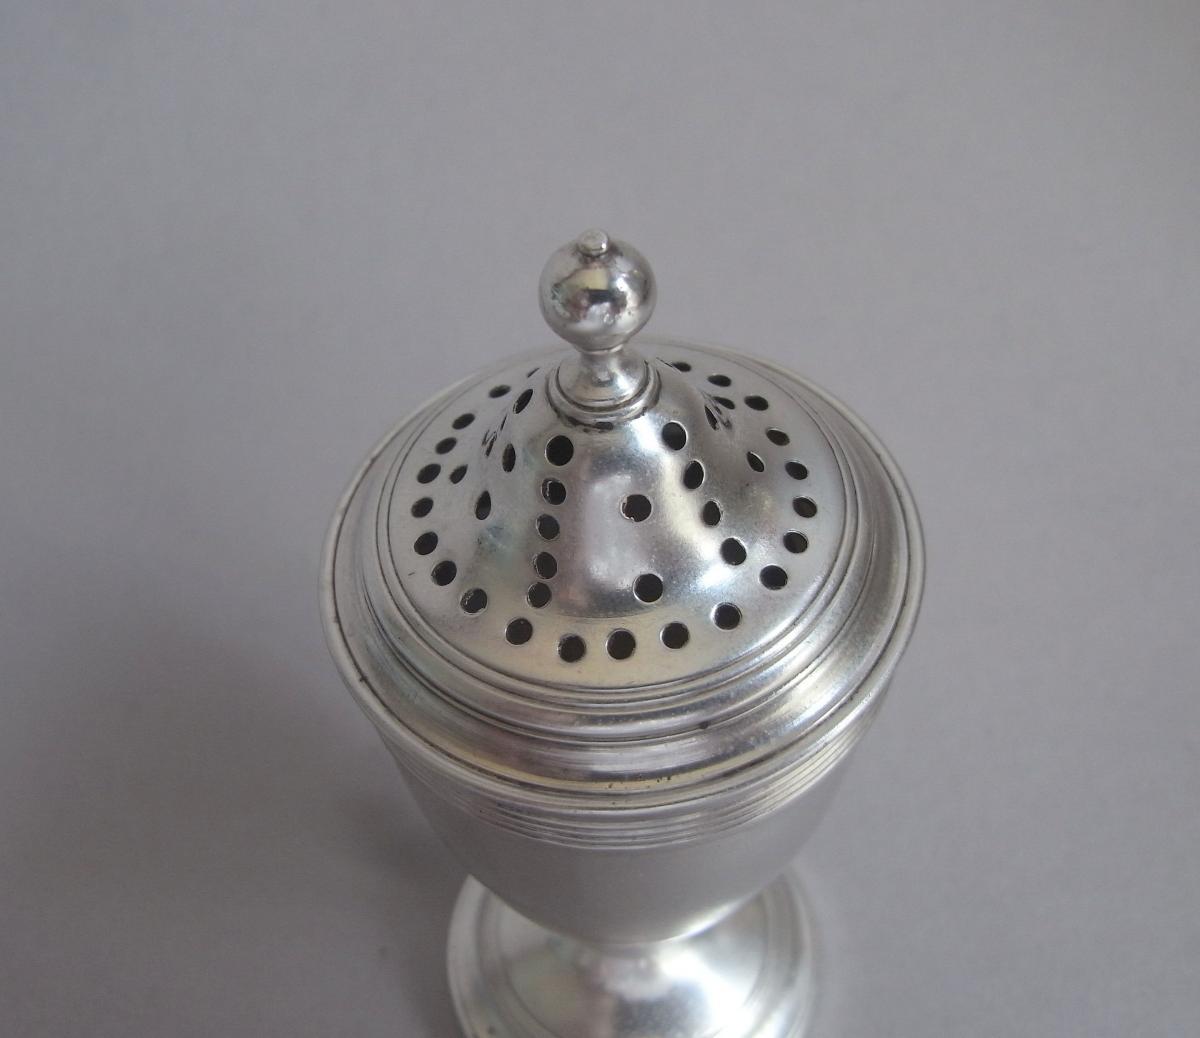 A fine George III Pepper Caster made in London in 1800 by John Robins